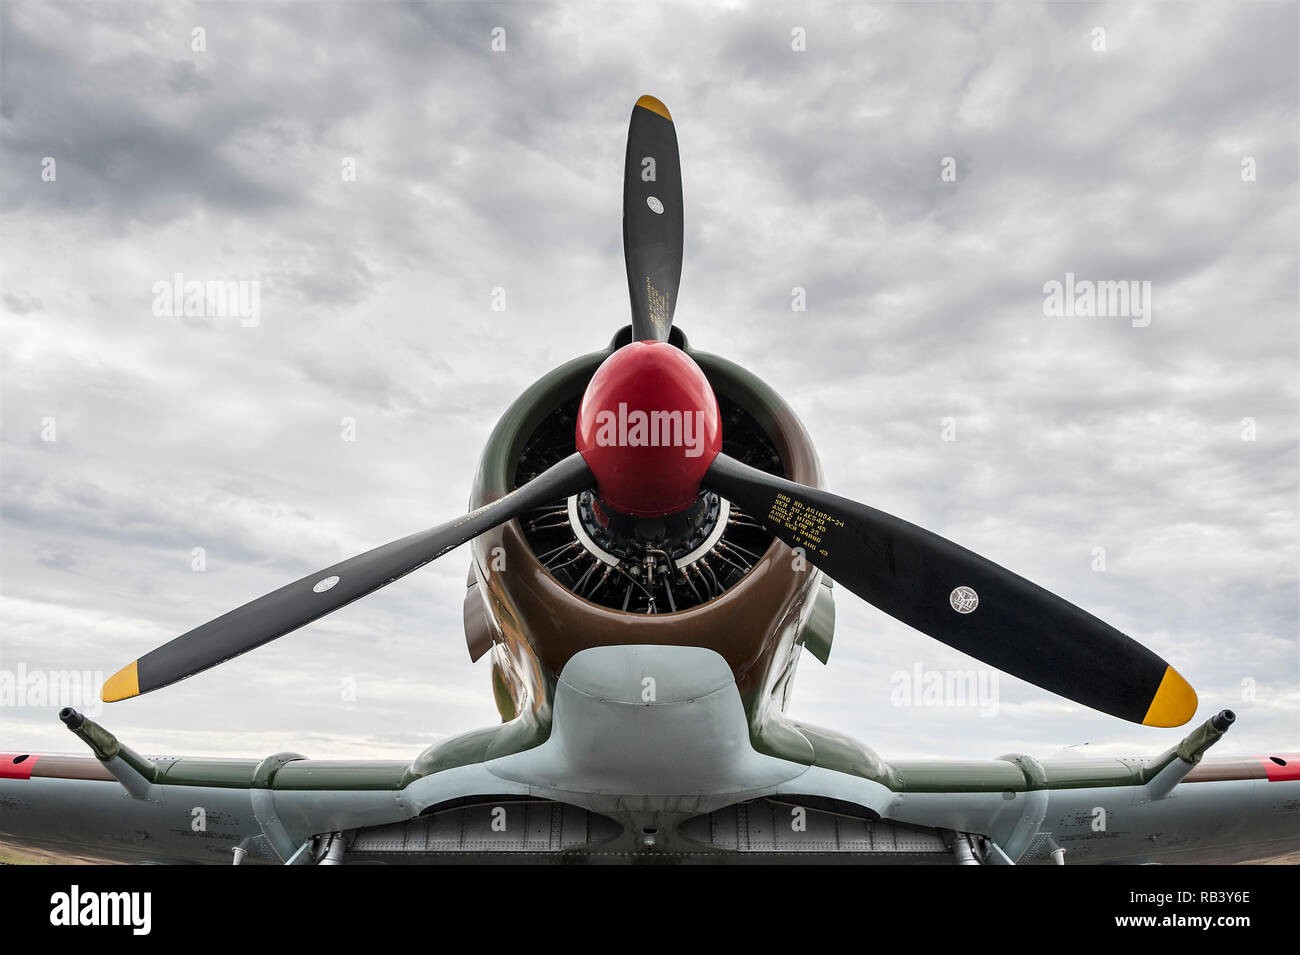 CAC Boomerang against a cloudy sky Stock Photo